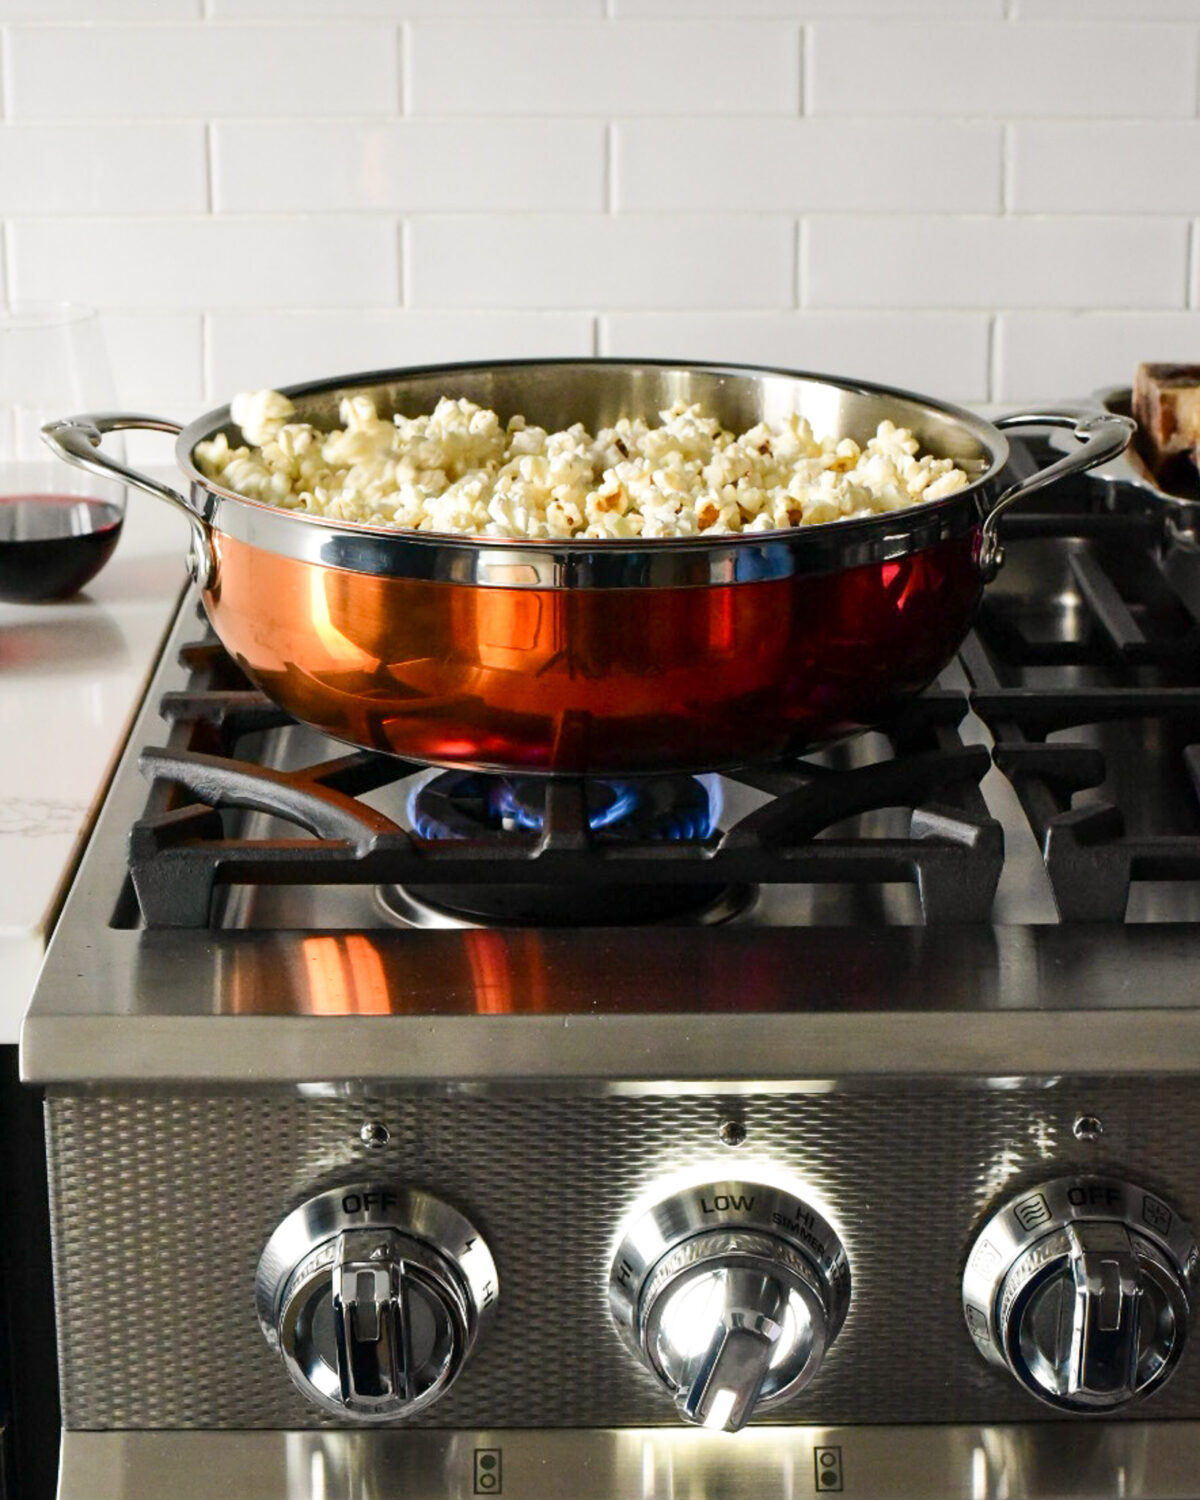 A copper pot with popcorn made on a stove top.